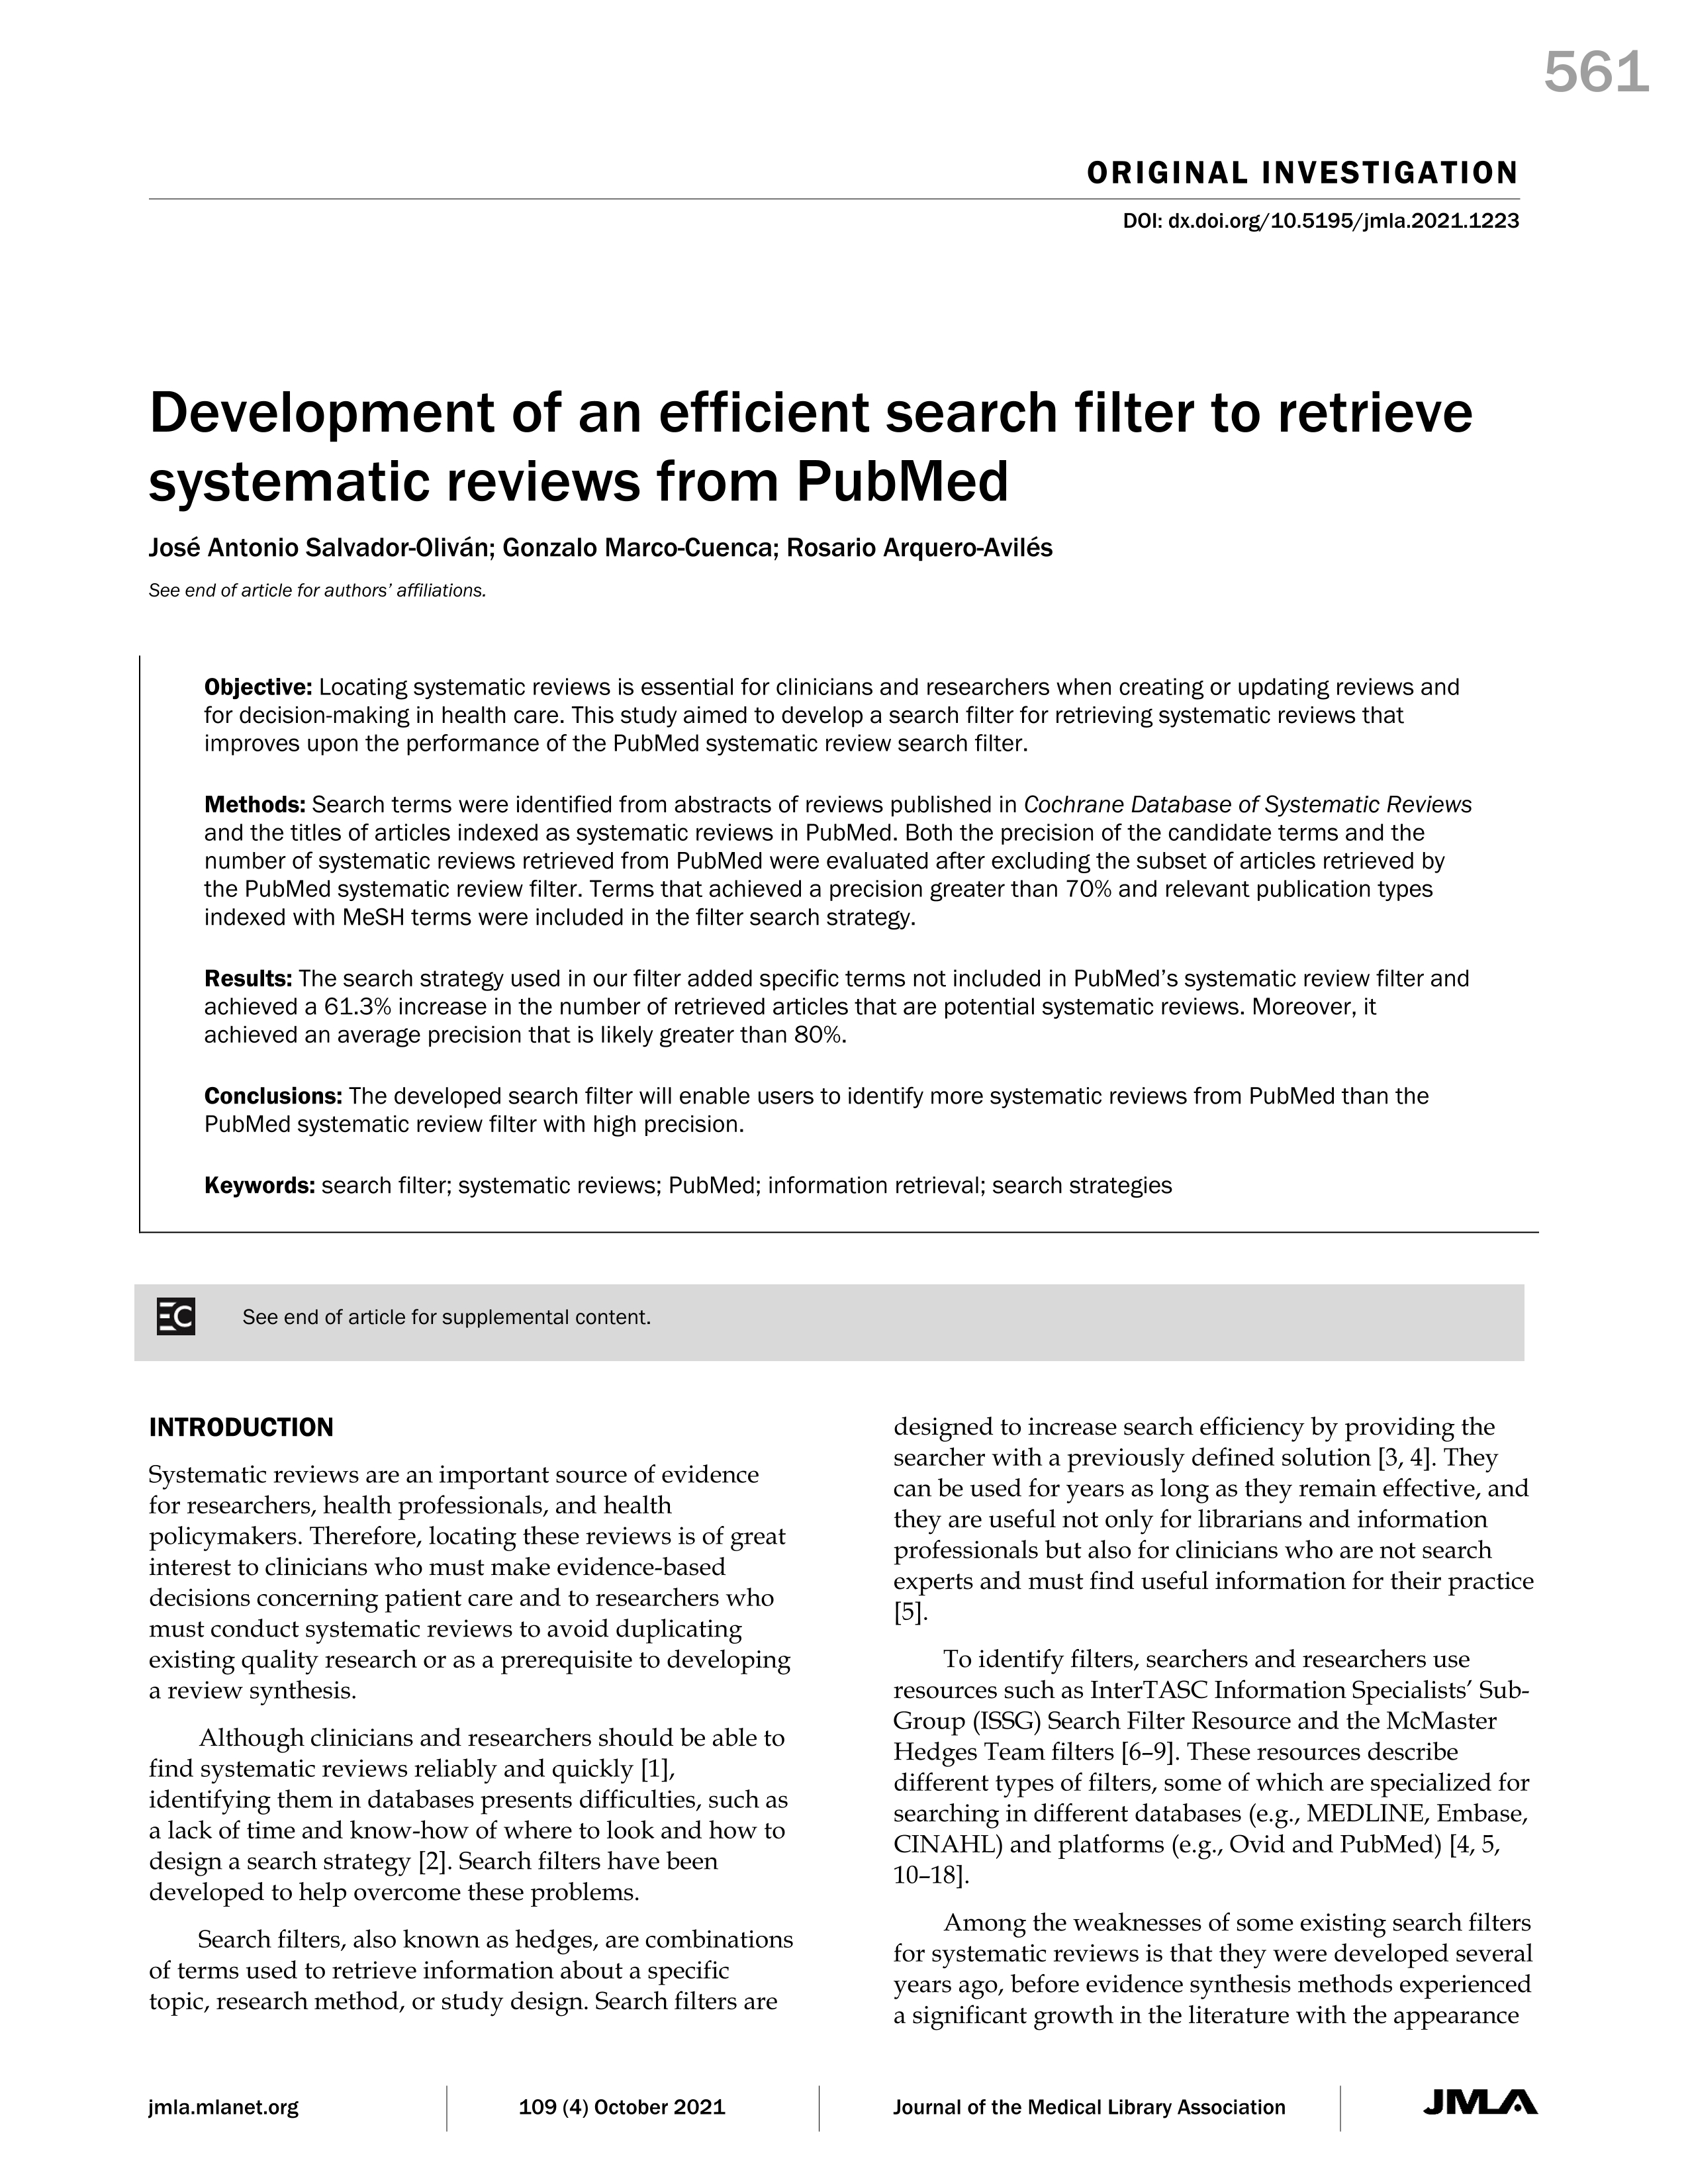 Development of an efficient search filter to retrieve systematic reviews from pubmed